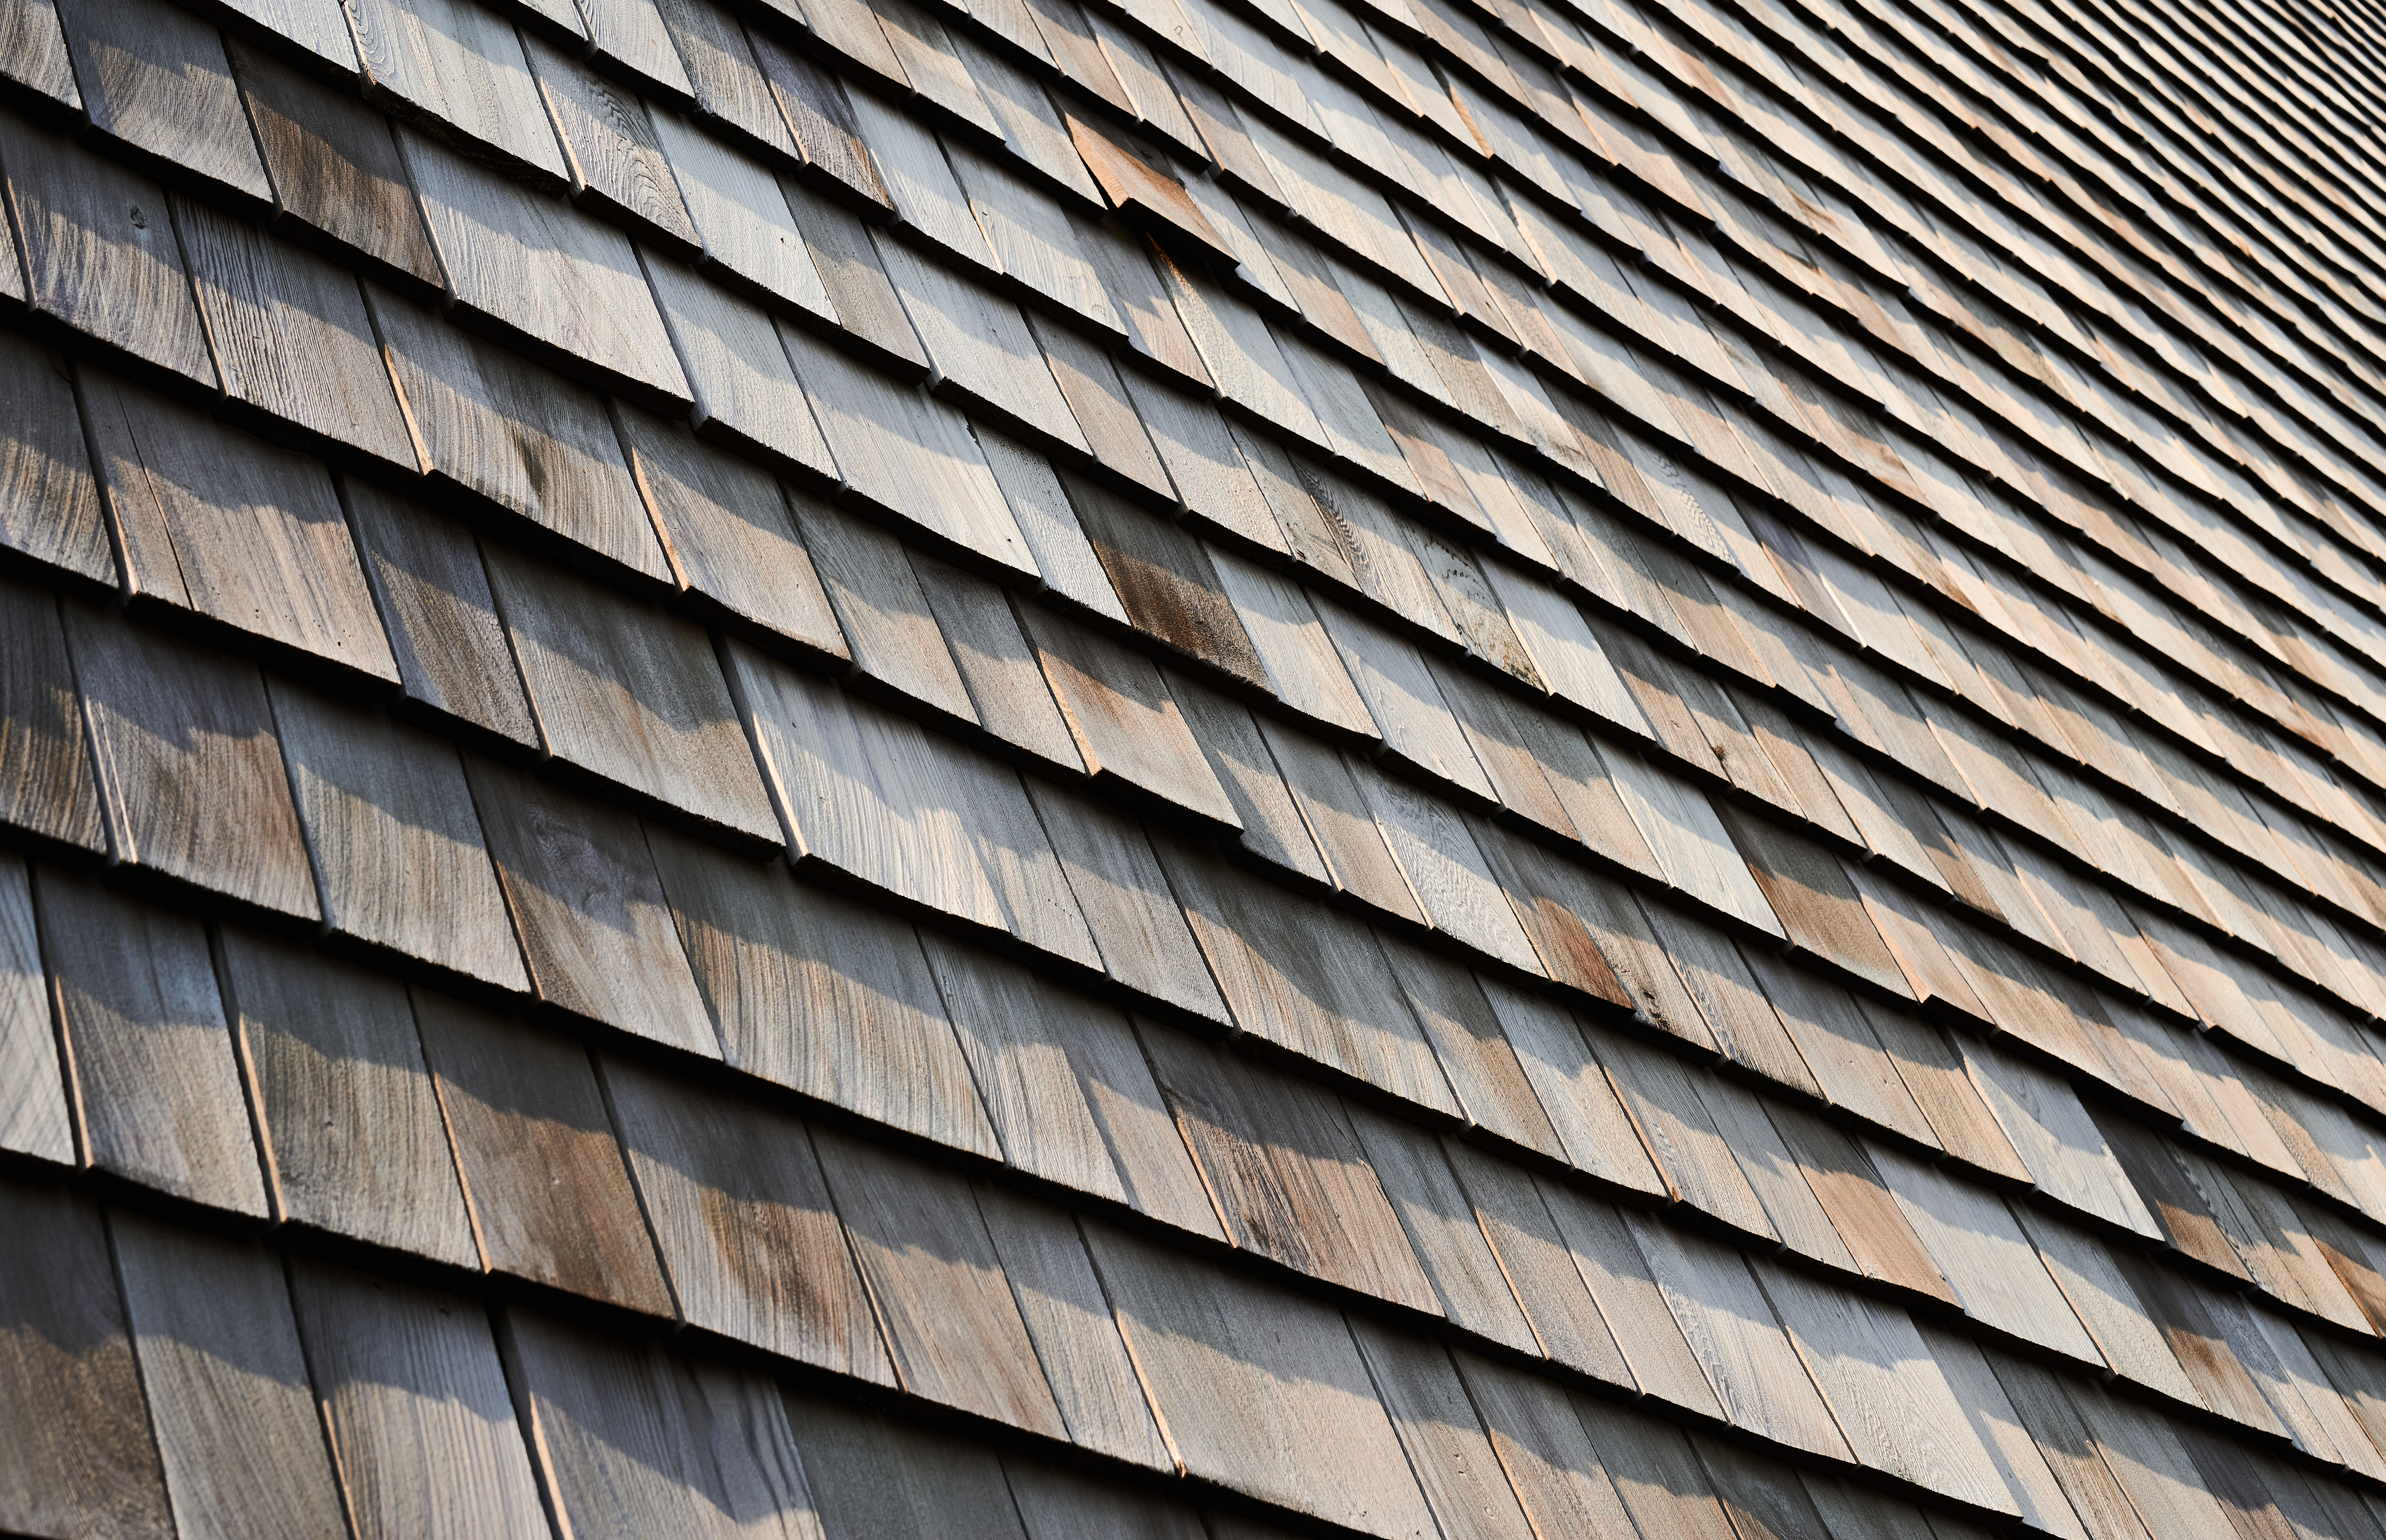 Cedar Shake Roofing Vs Synthetic Cedar Shake Roofing: Which is Best for You?